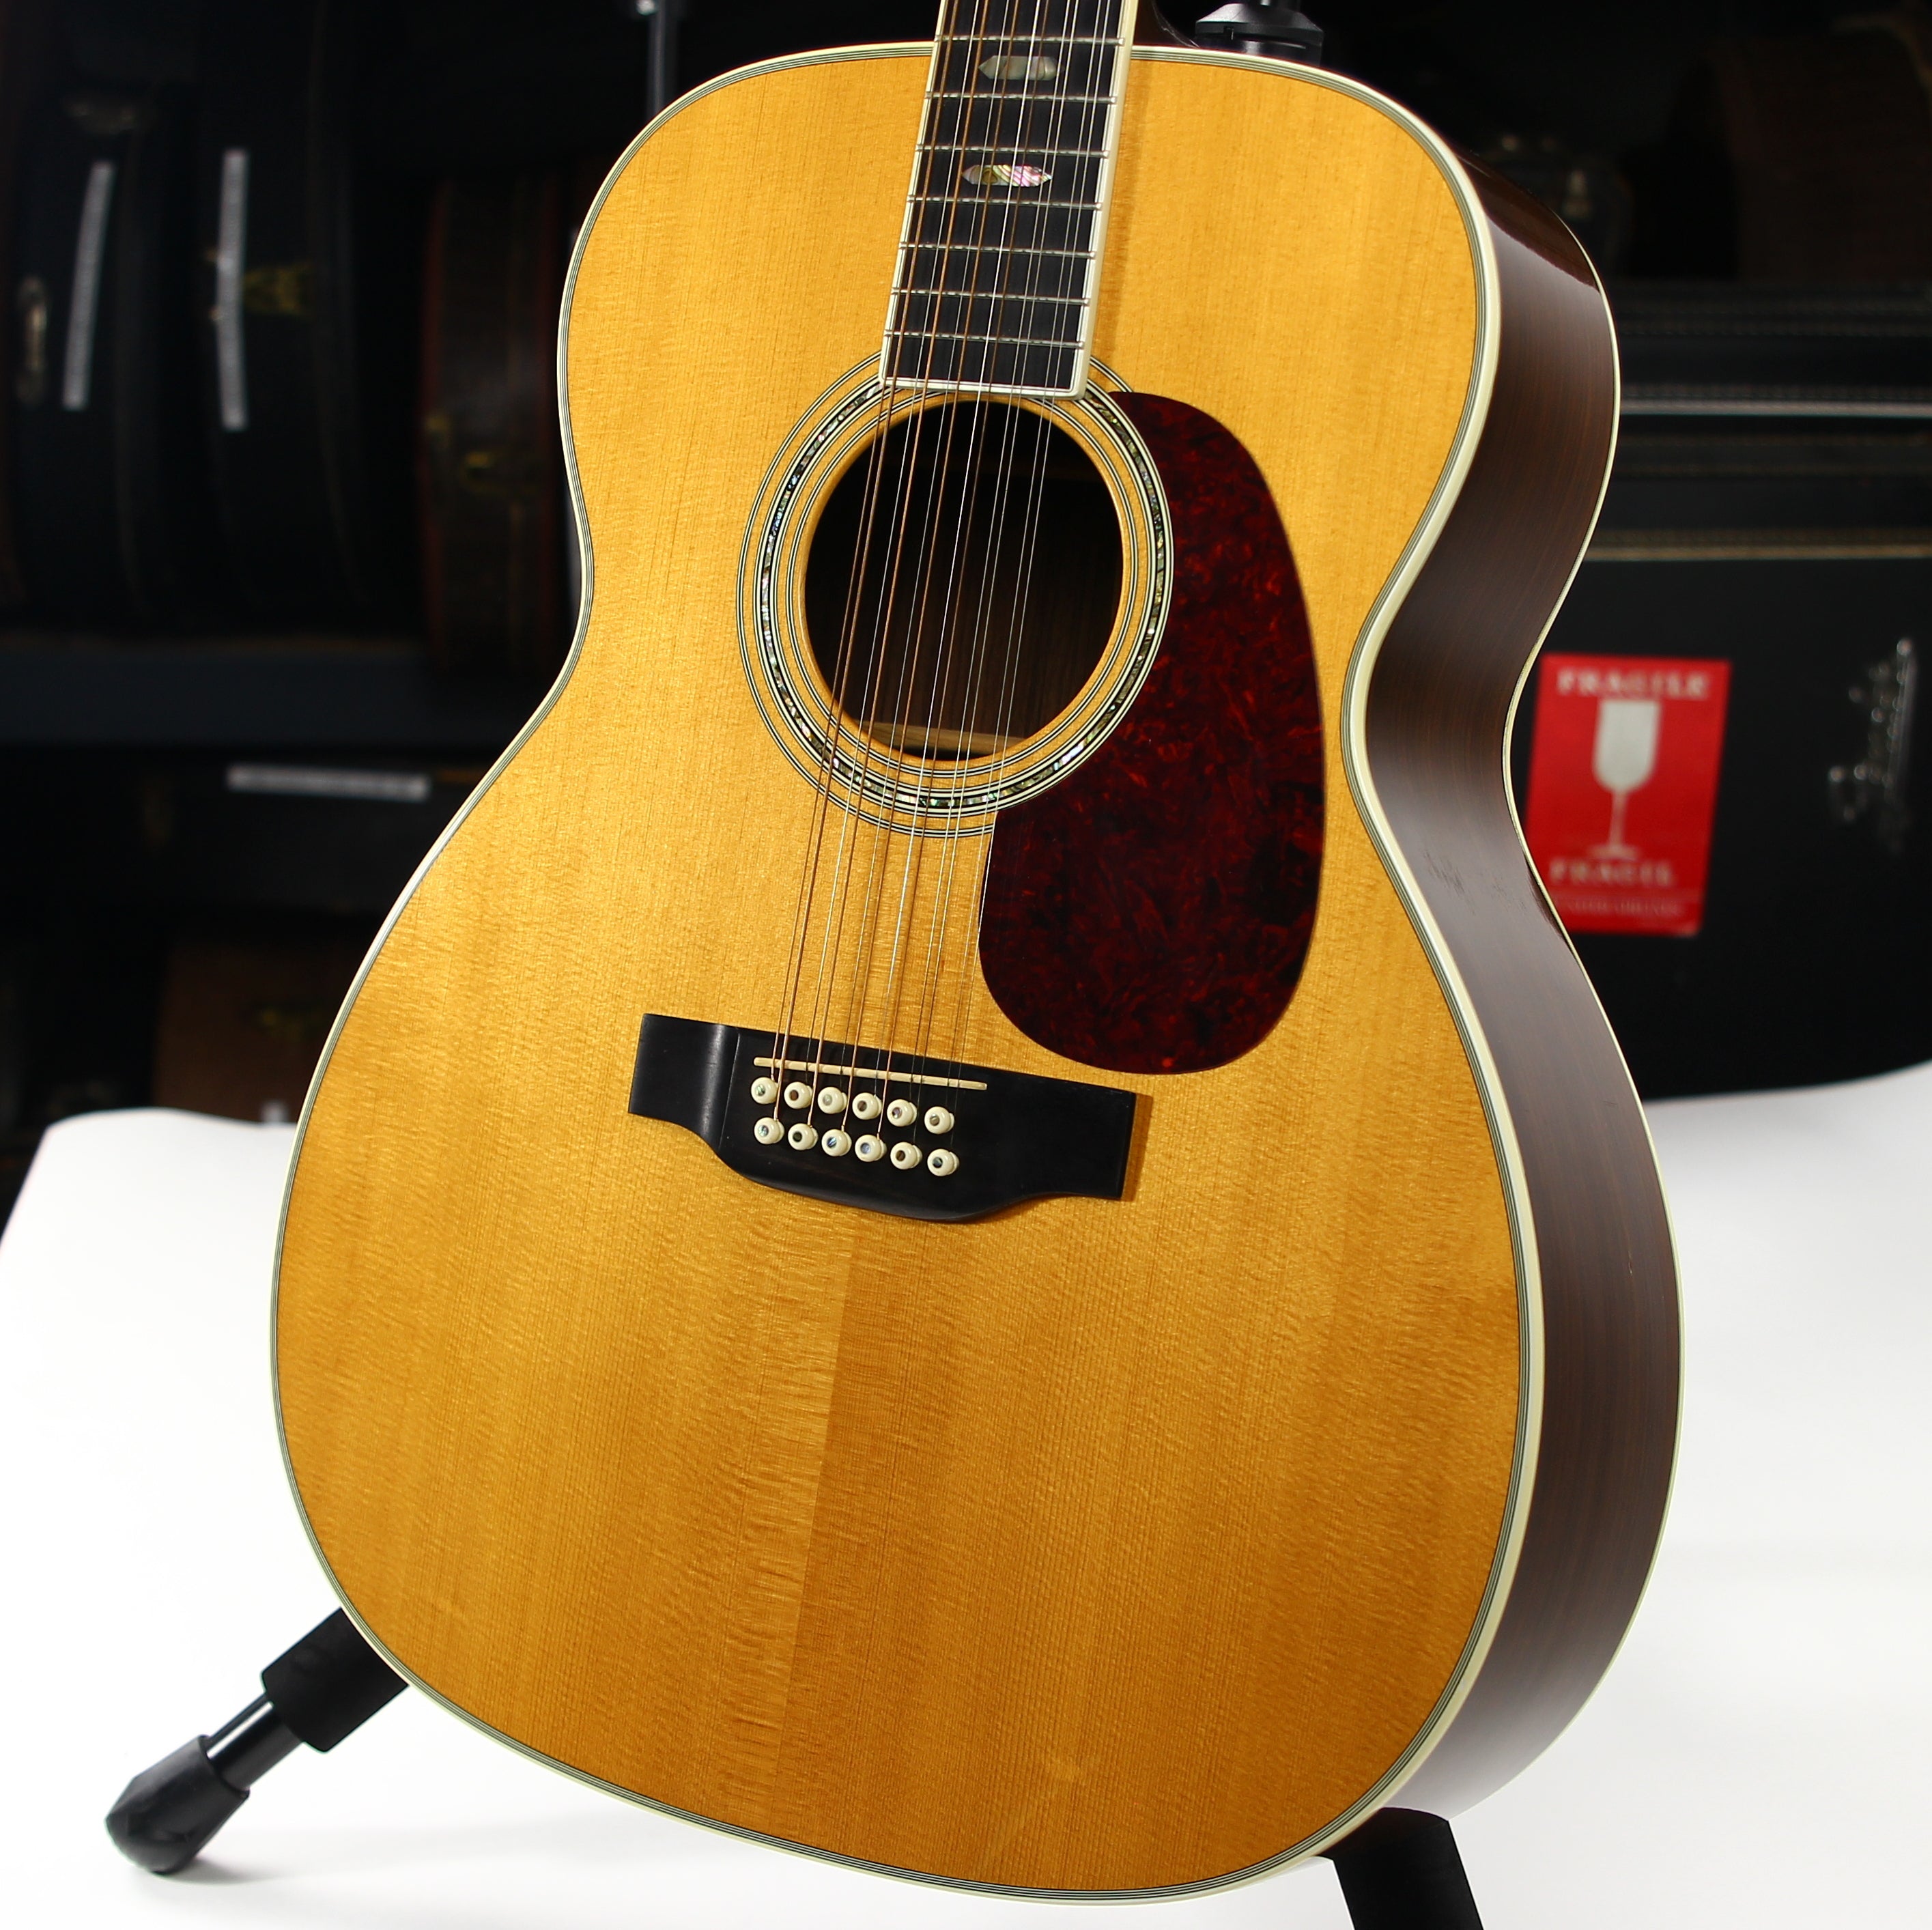 *SOLD*  1996 Martin J12-40 Acoustic Jumbo Flat Top 12-String J-40 Guitar - Low Action, Sounds Amazing!